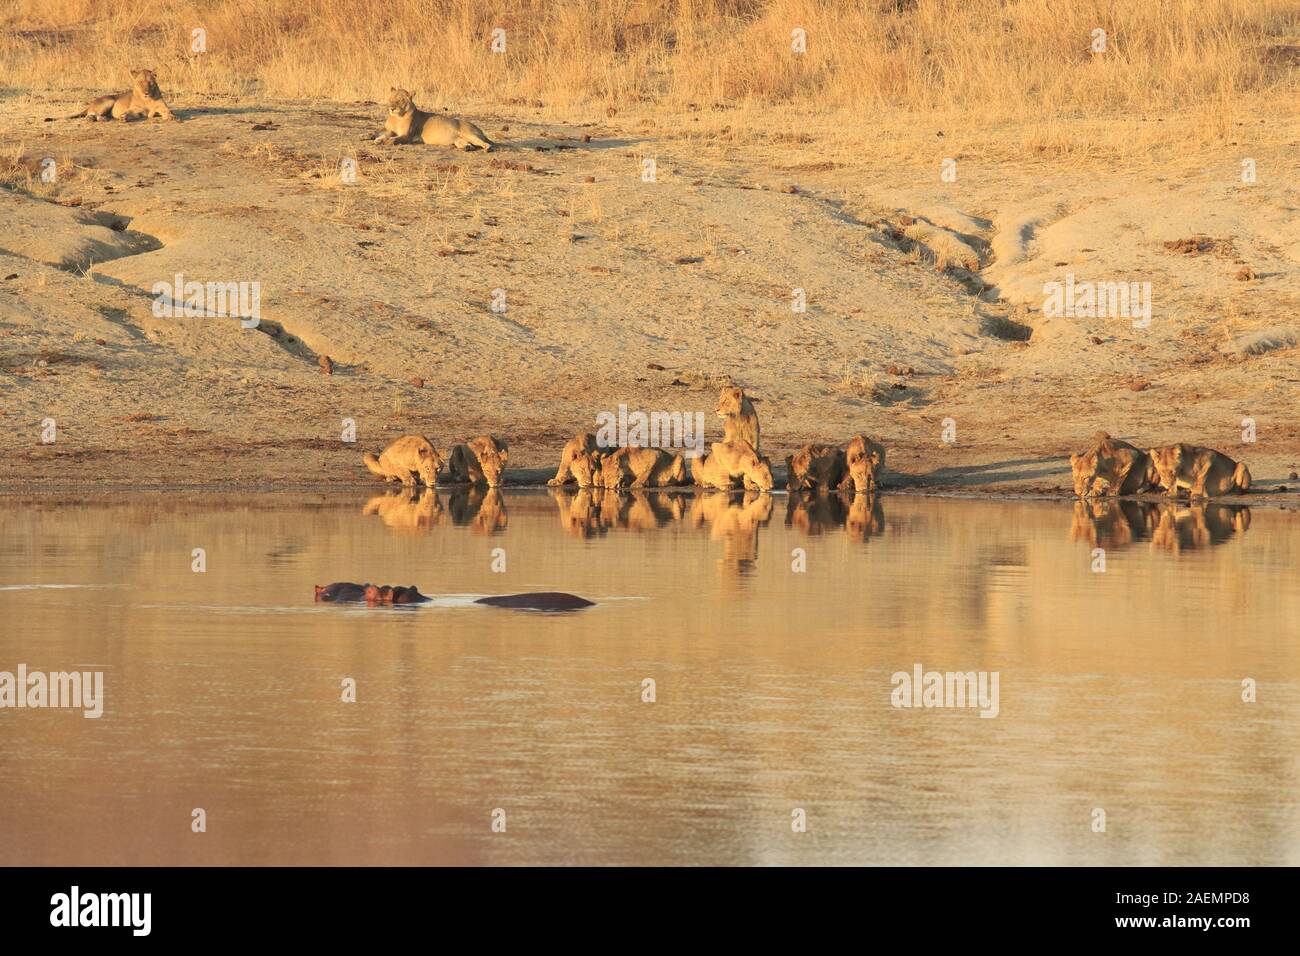 Lionesses drinking at a waterhole Stock Photo